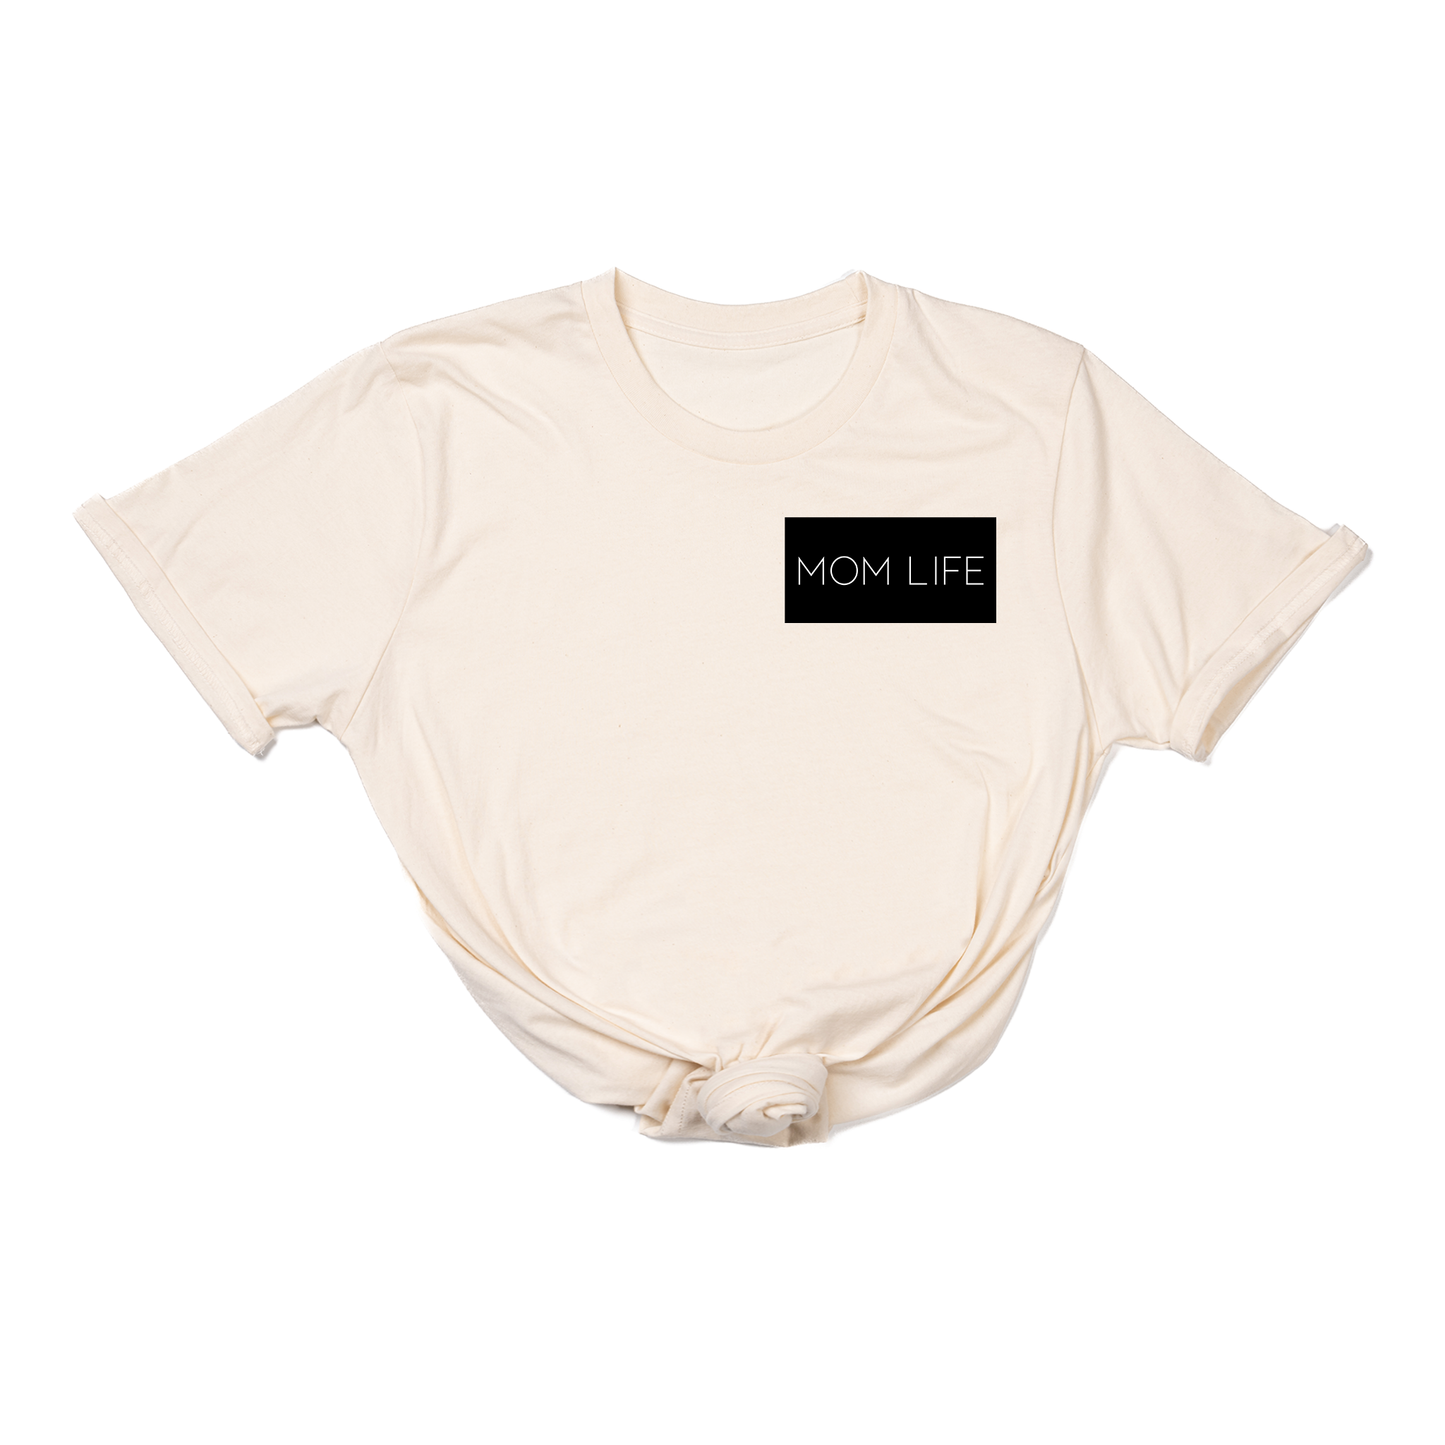 Mom Life (Boxed Collection, Pocket, Black Box/White Text) - Tee (Natural)